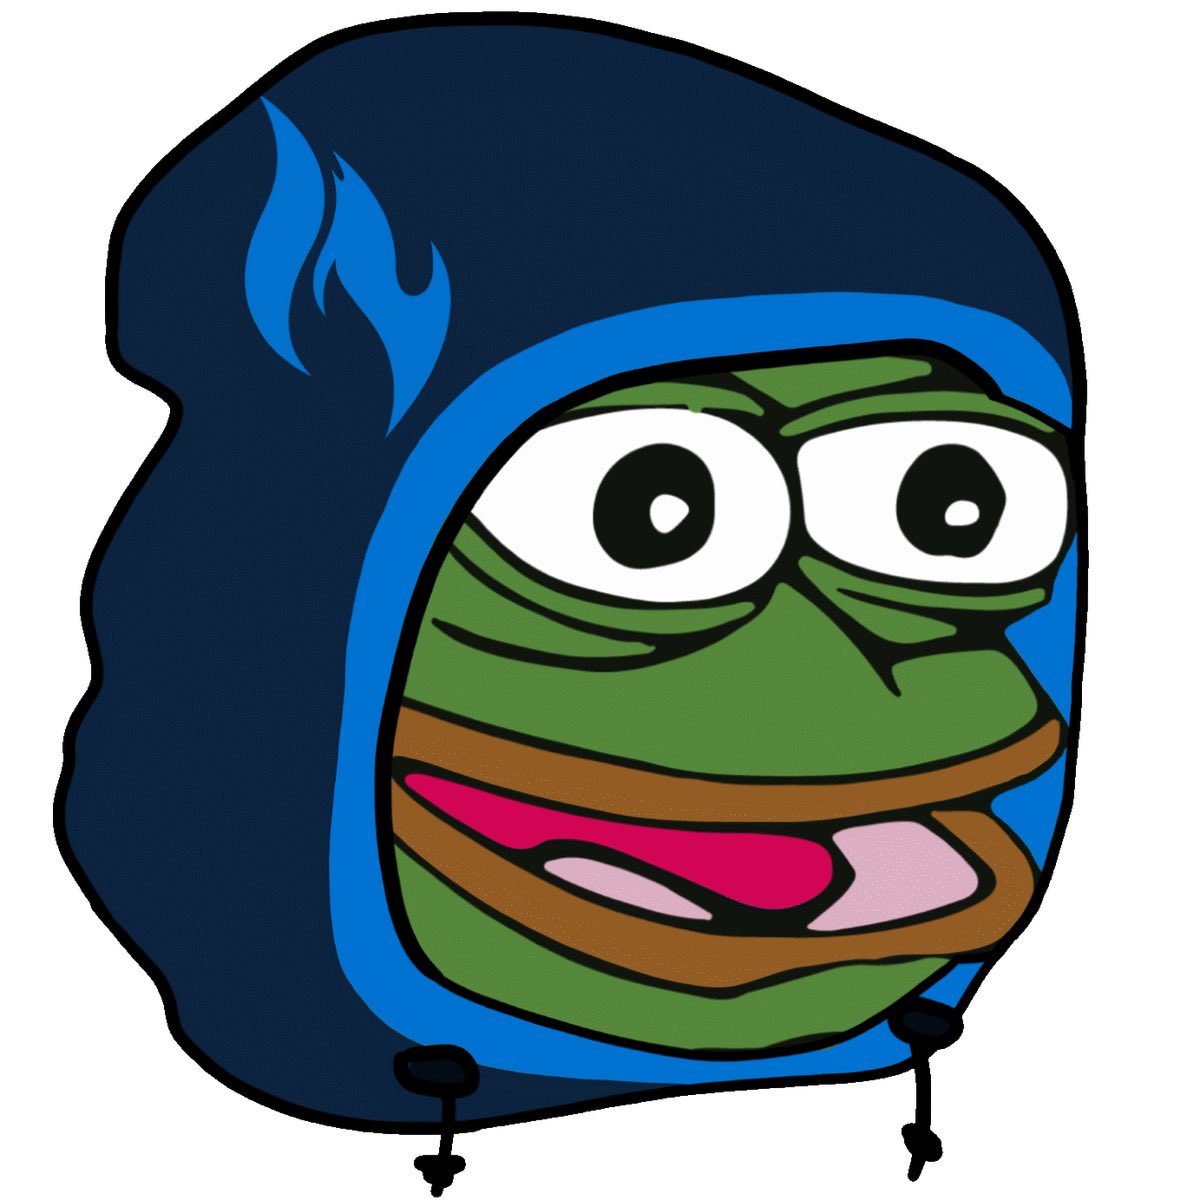 Rod Breslau Pa Twitter For My Third Motion As Overwatch League Commissioner Pepe The Frog Memes Signs Emotes Are Now Unbanned For All And The Ok Symbol Is Ok To Use Going